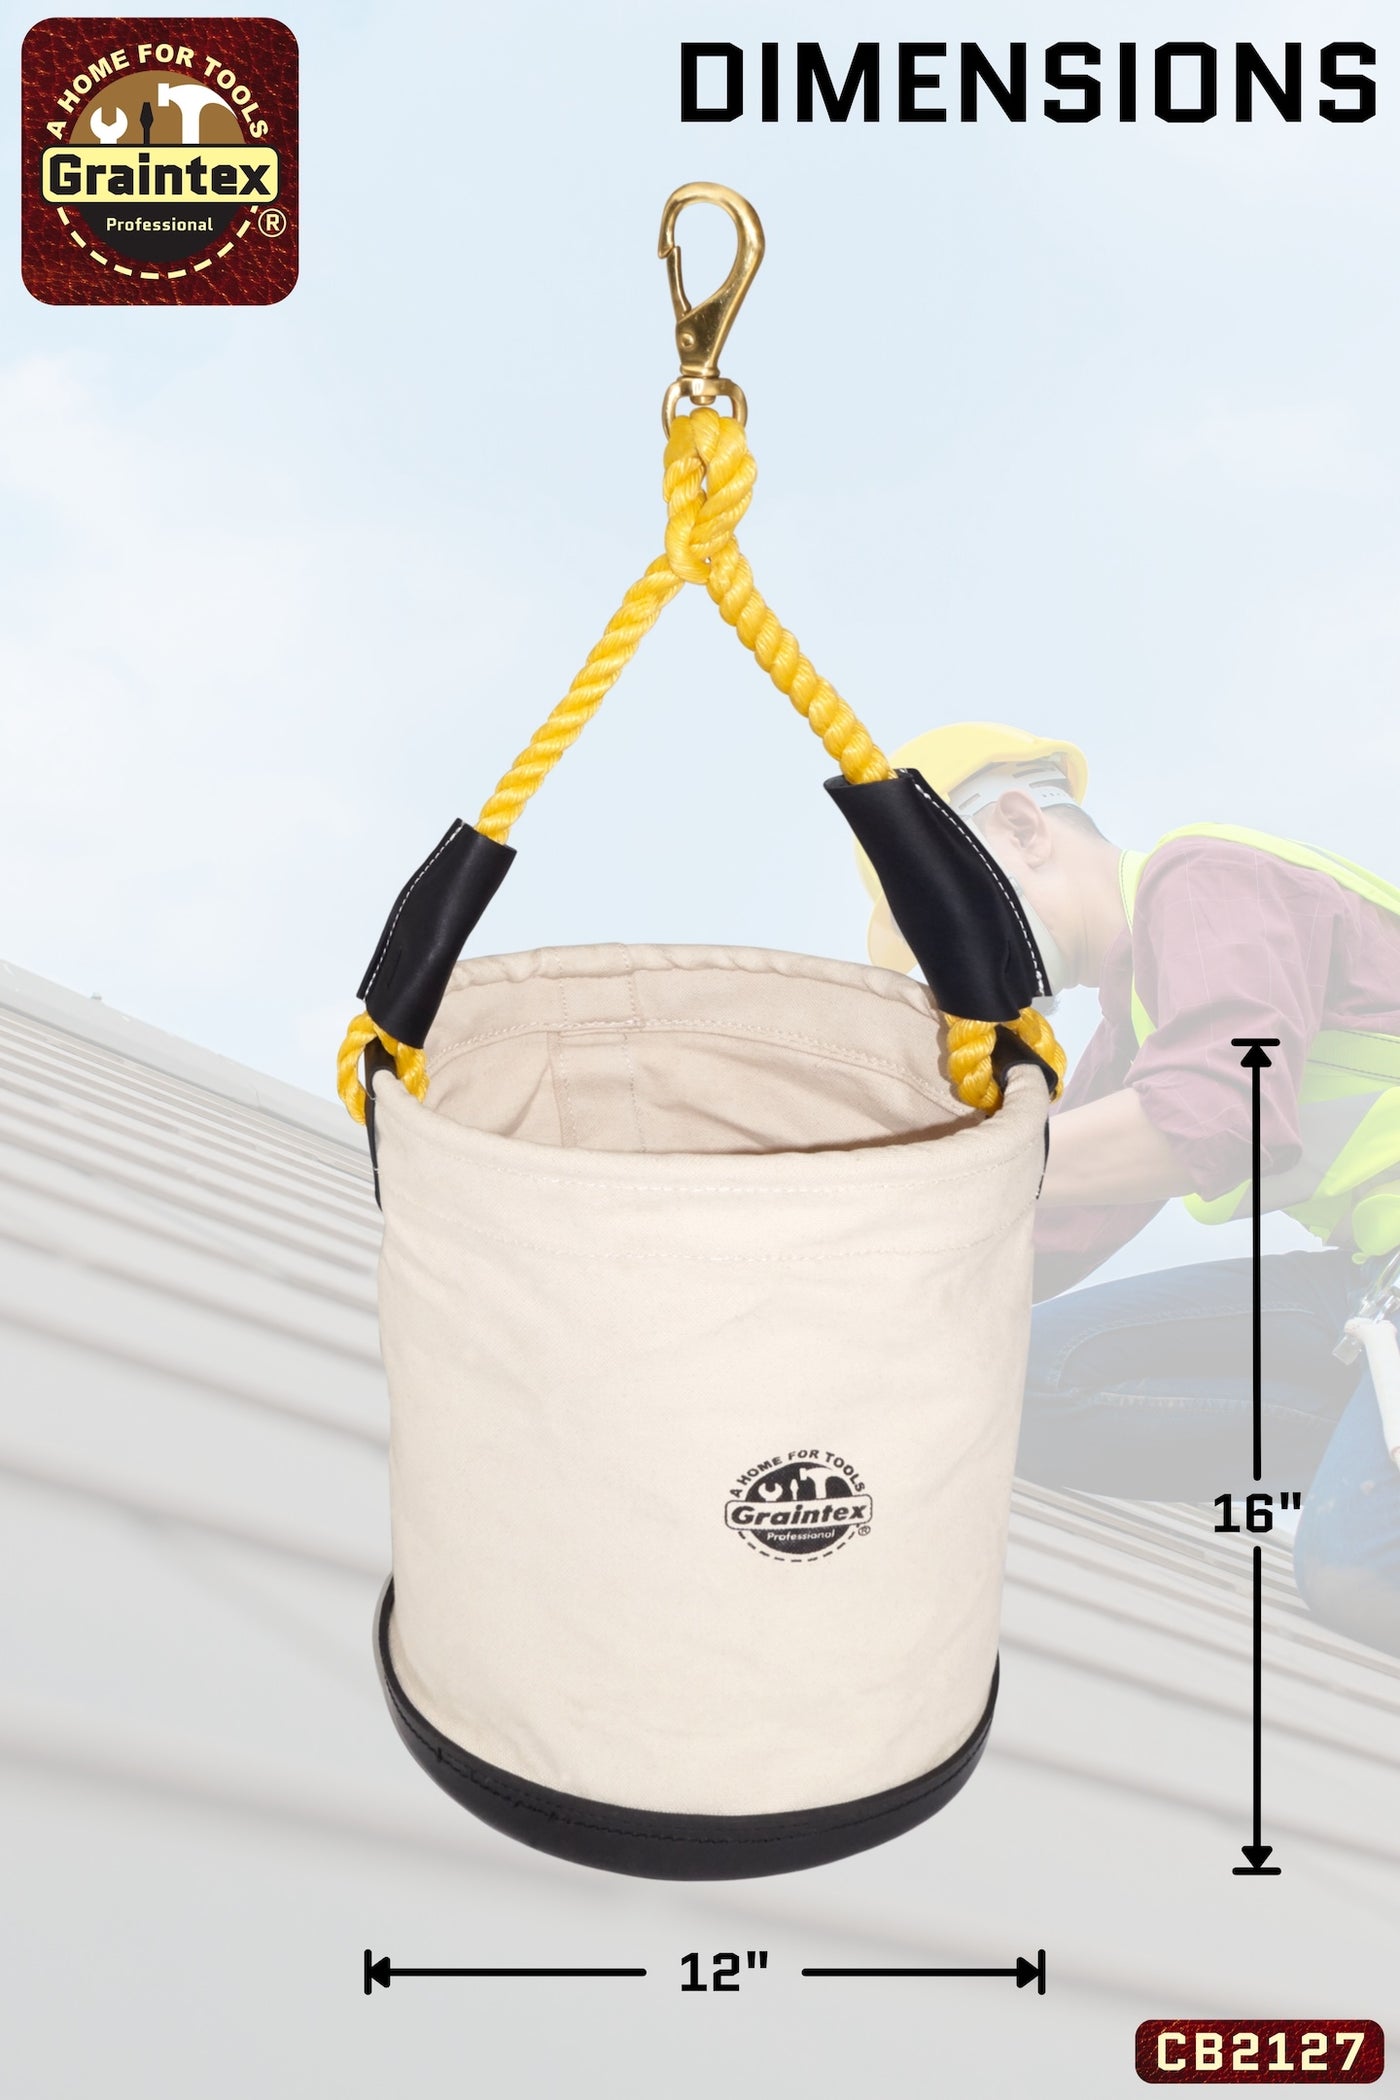 CB2127 :: UTILITY CANVAS BUCKET PLASTIC BOTTOM 12”X16” ROPE HANDLE WITH SWIVEL SNAP HOOK